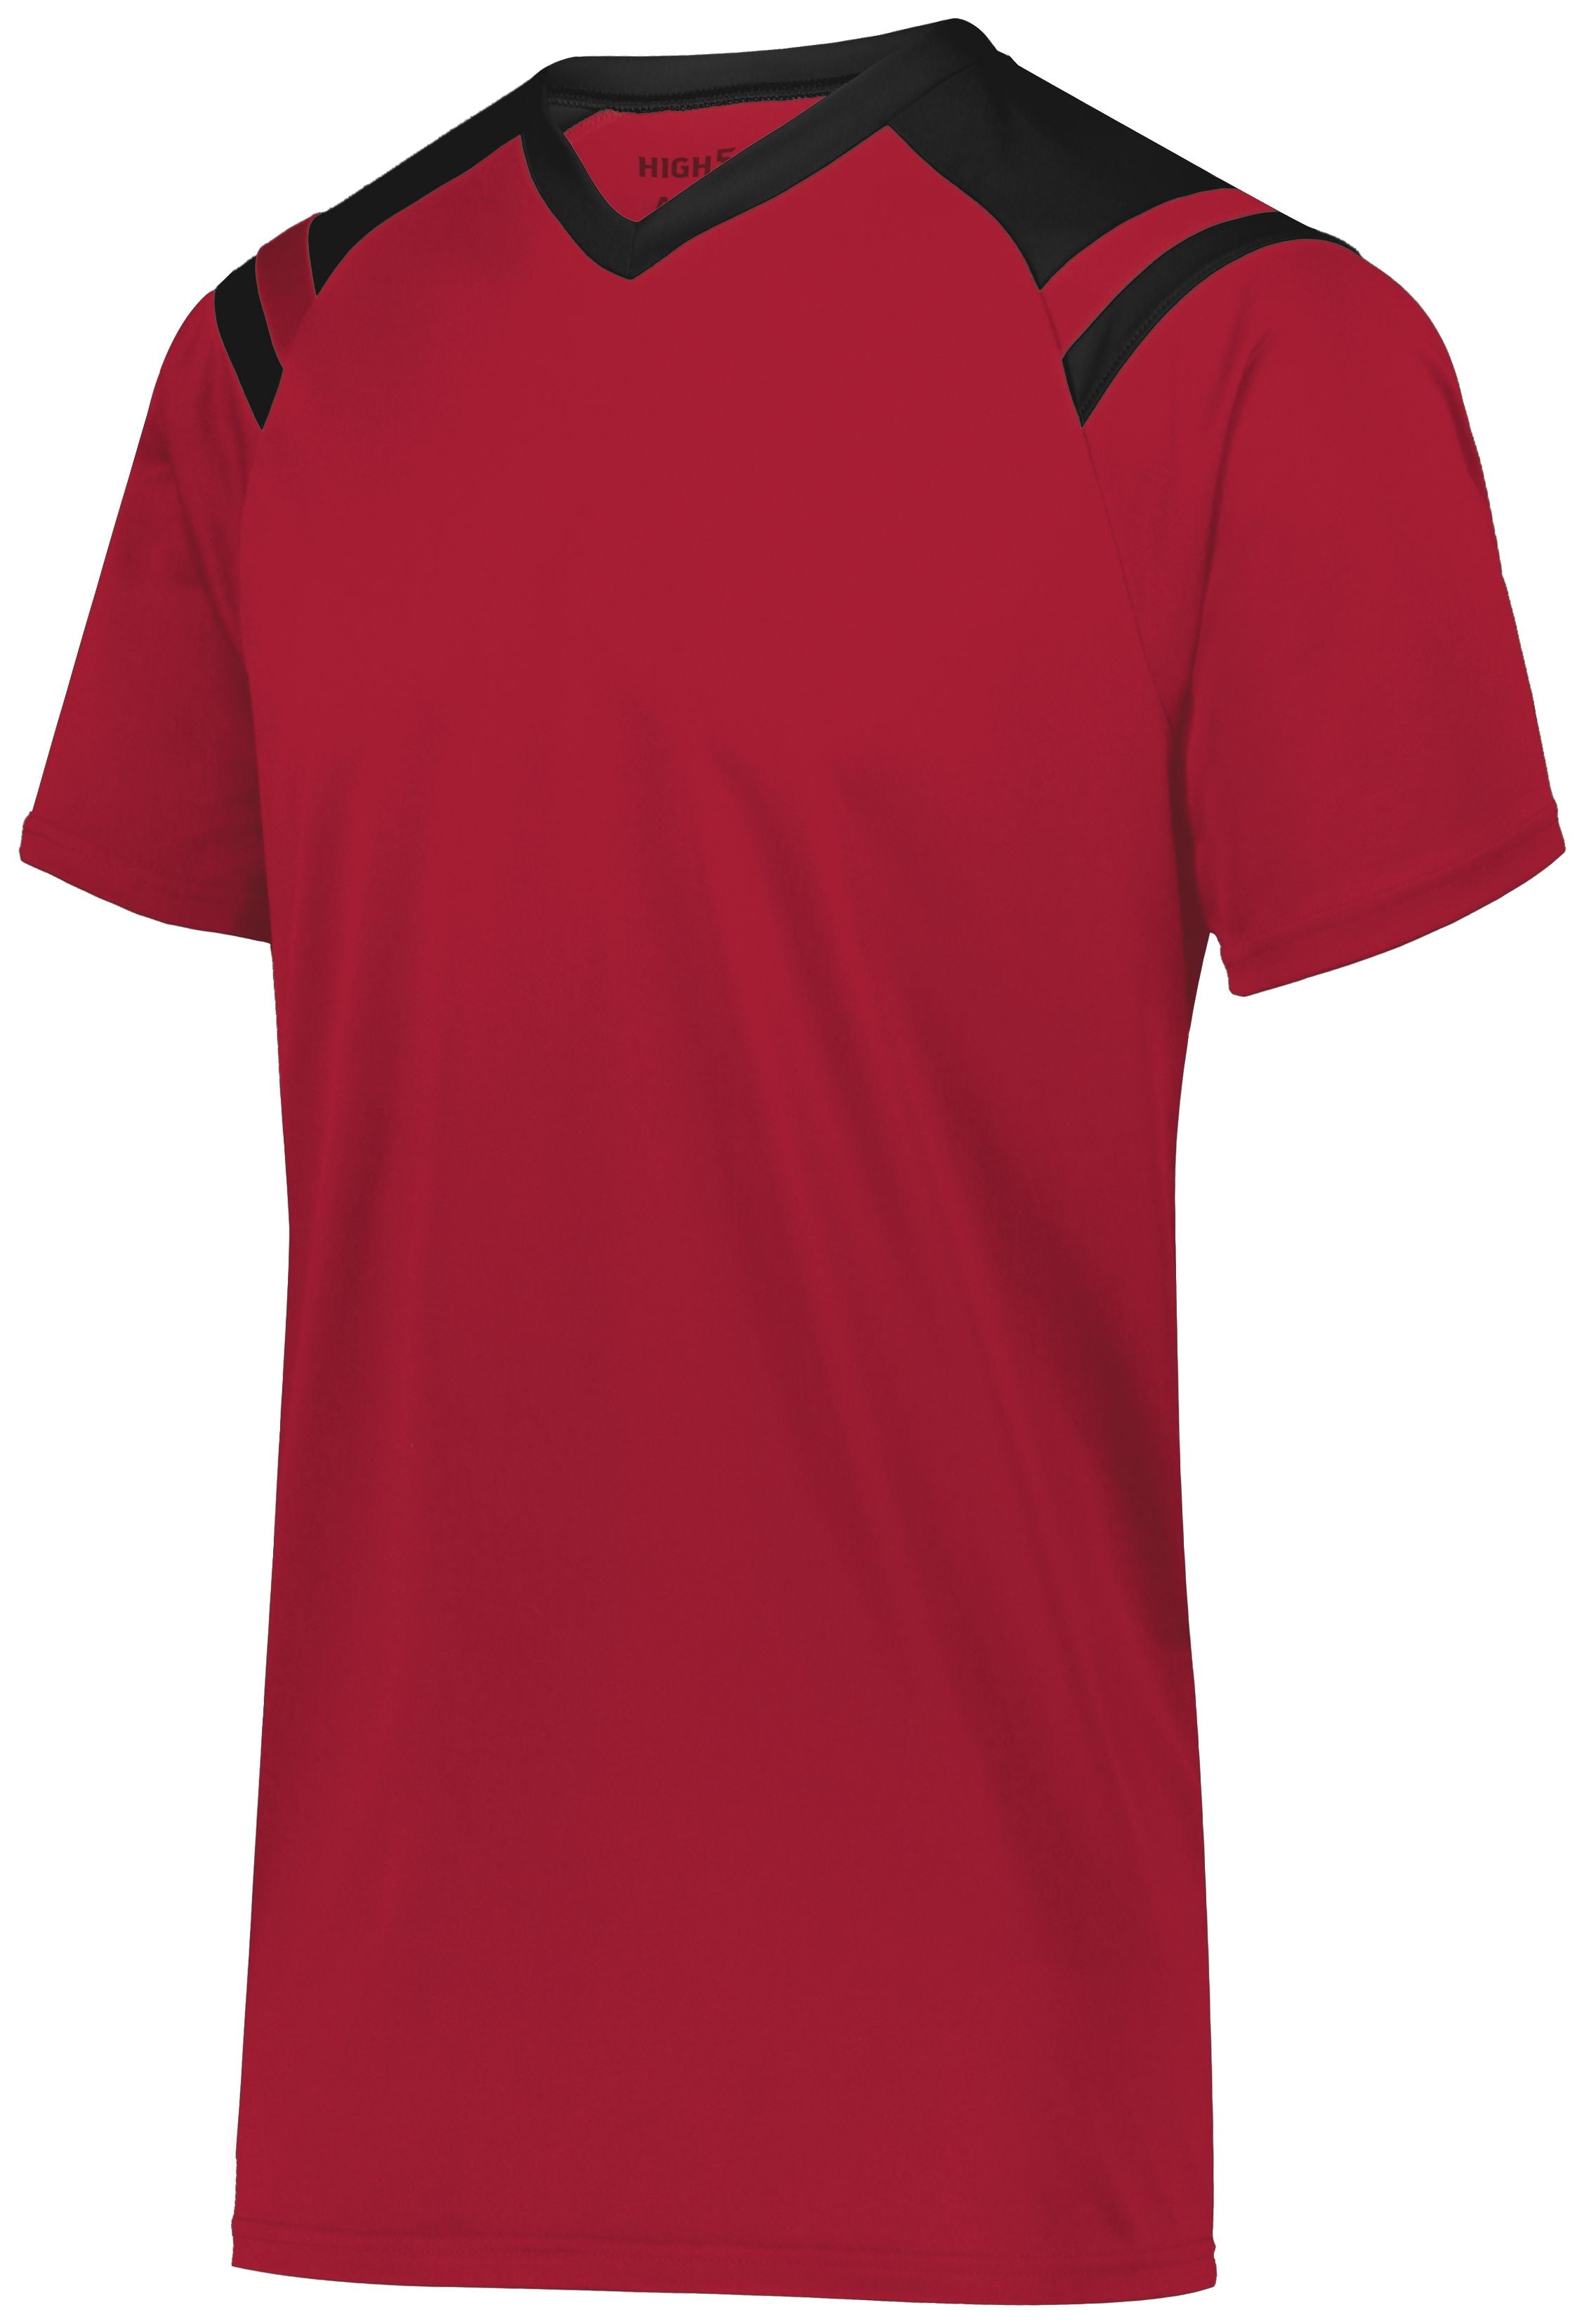 High 5 Sheffield Jersey in Scarlet/Black  -Part of the Adult, Adult-Jersey, High5-Products, Soccer, Shirts, All-Sports-1, Sheffield-Soccer-Jerseys product lines at KanaleyCreations.com